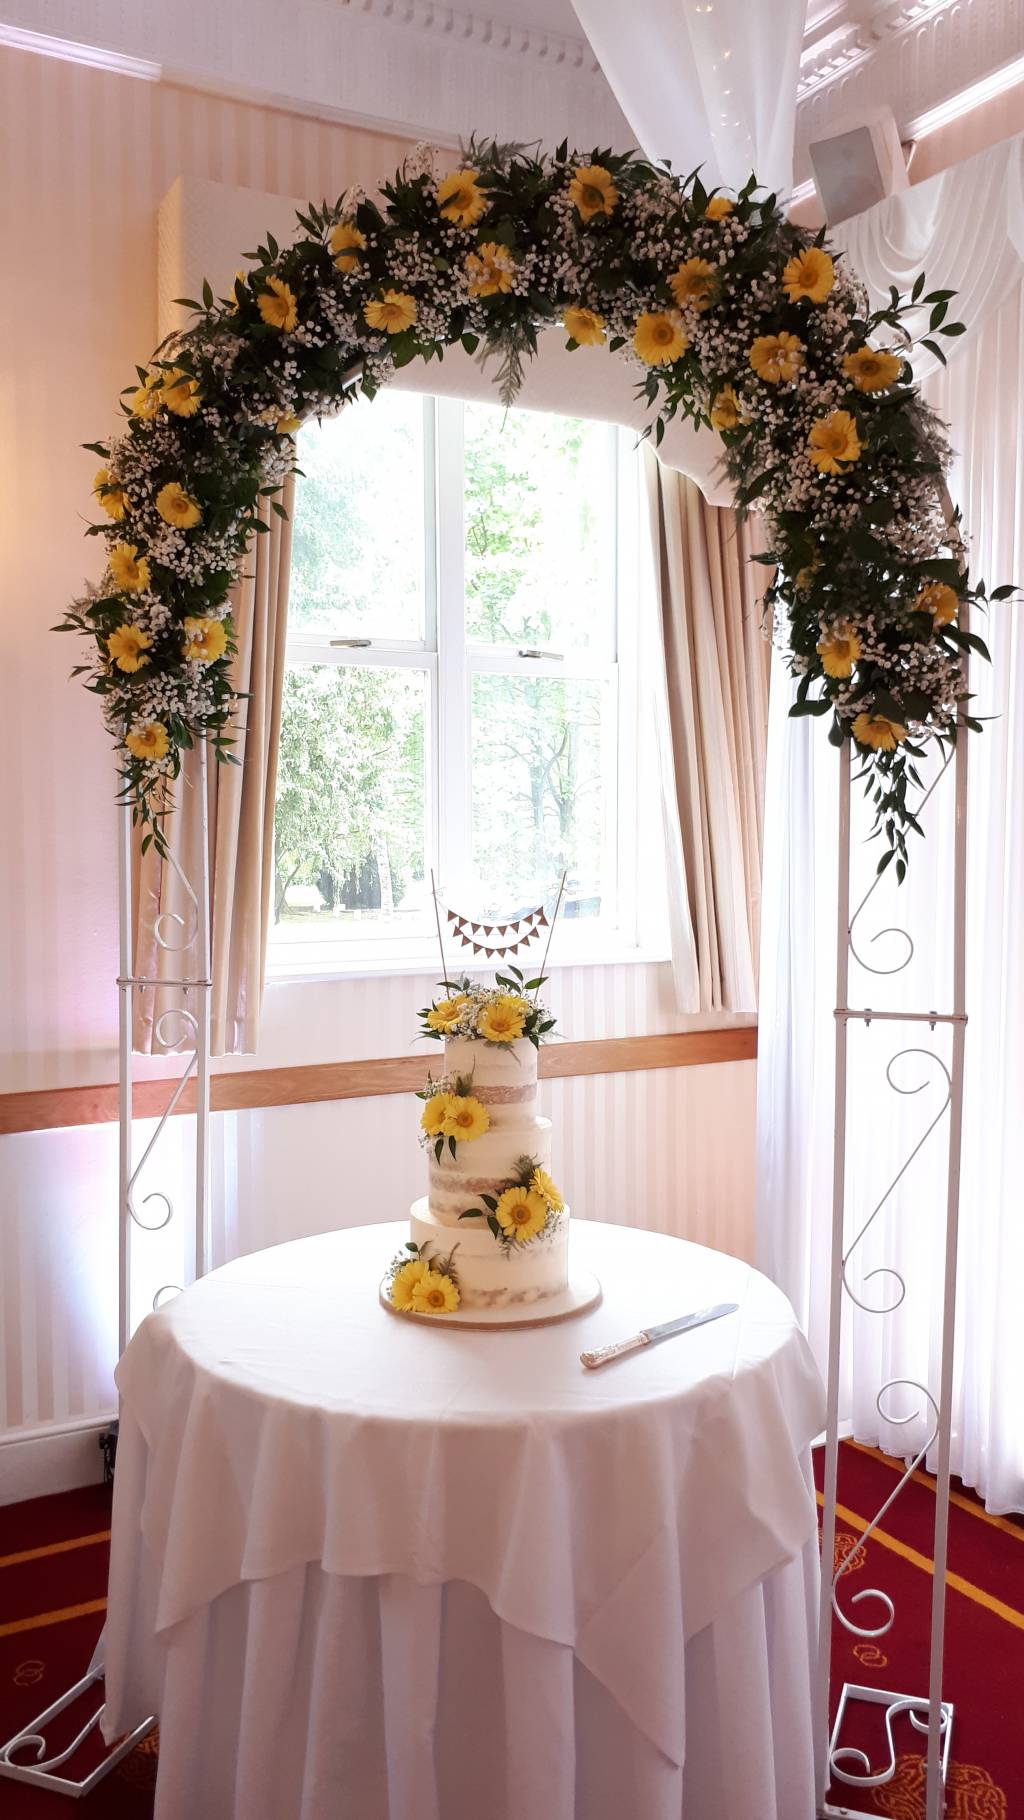 Image of a wedding flower arch